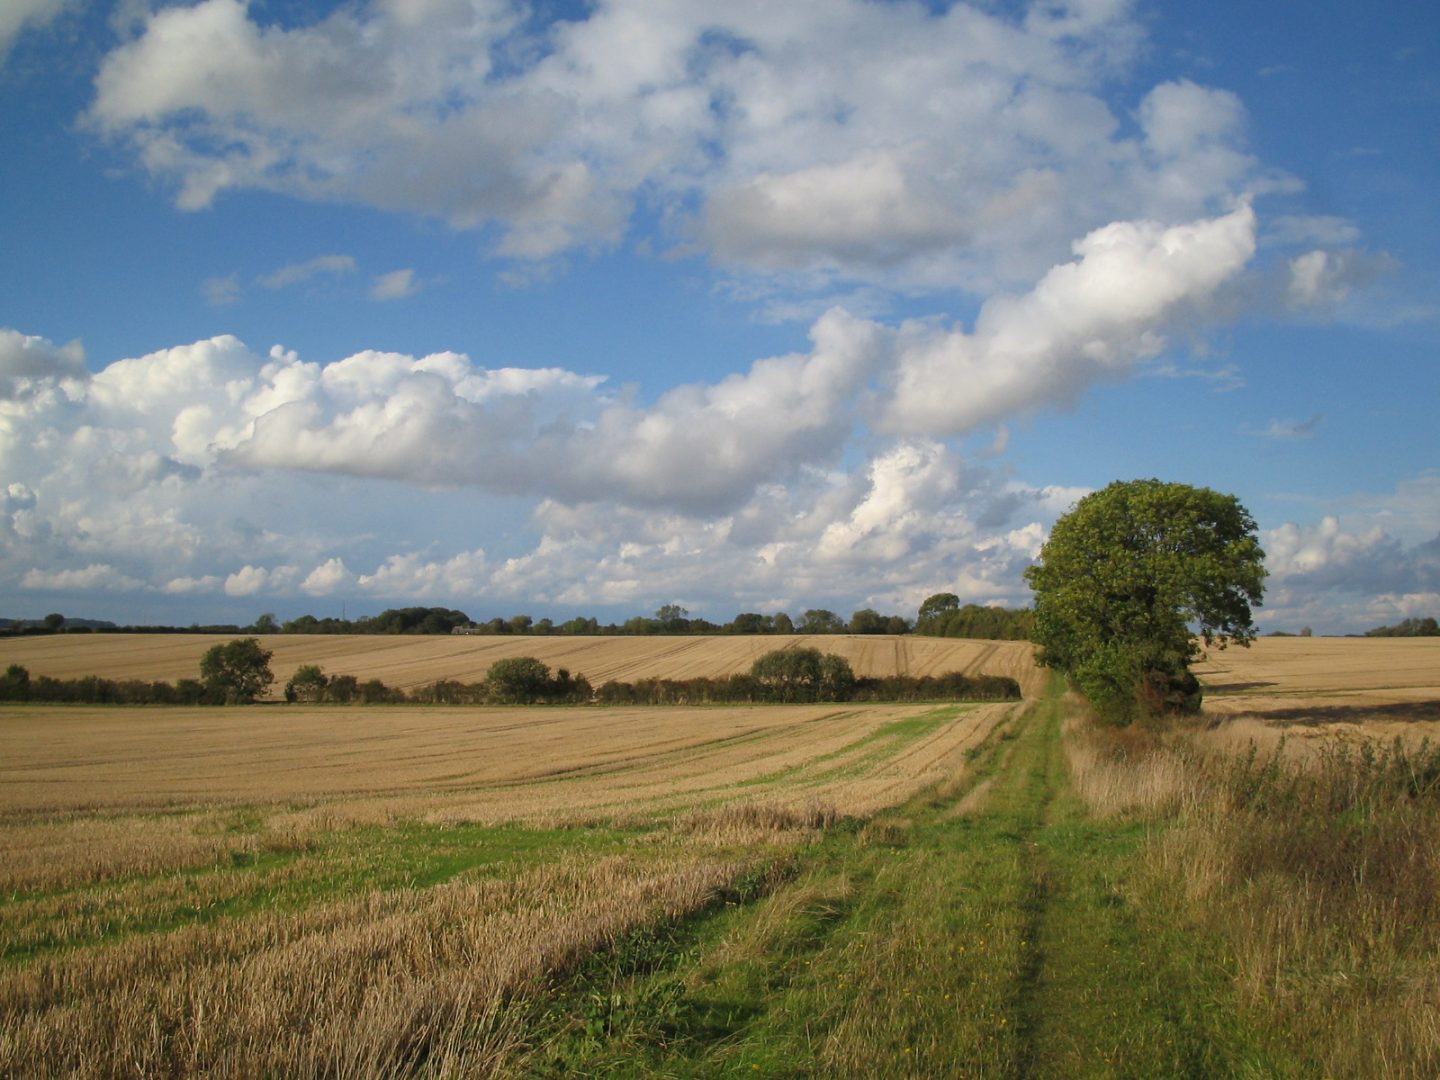 Countryside grassland with tree in middle distance